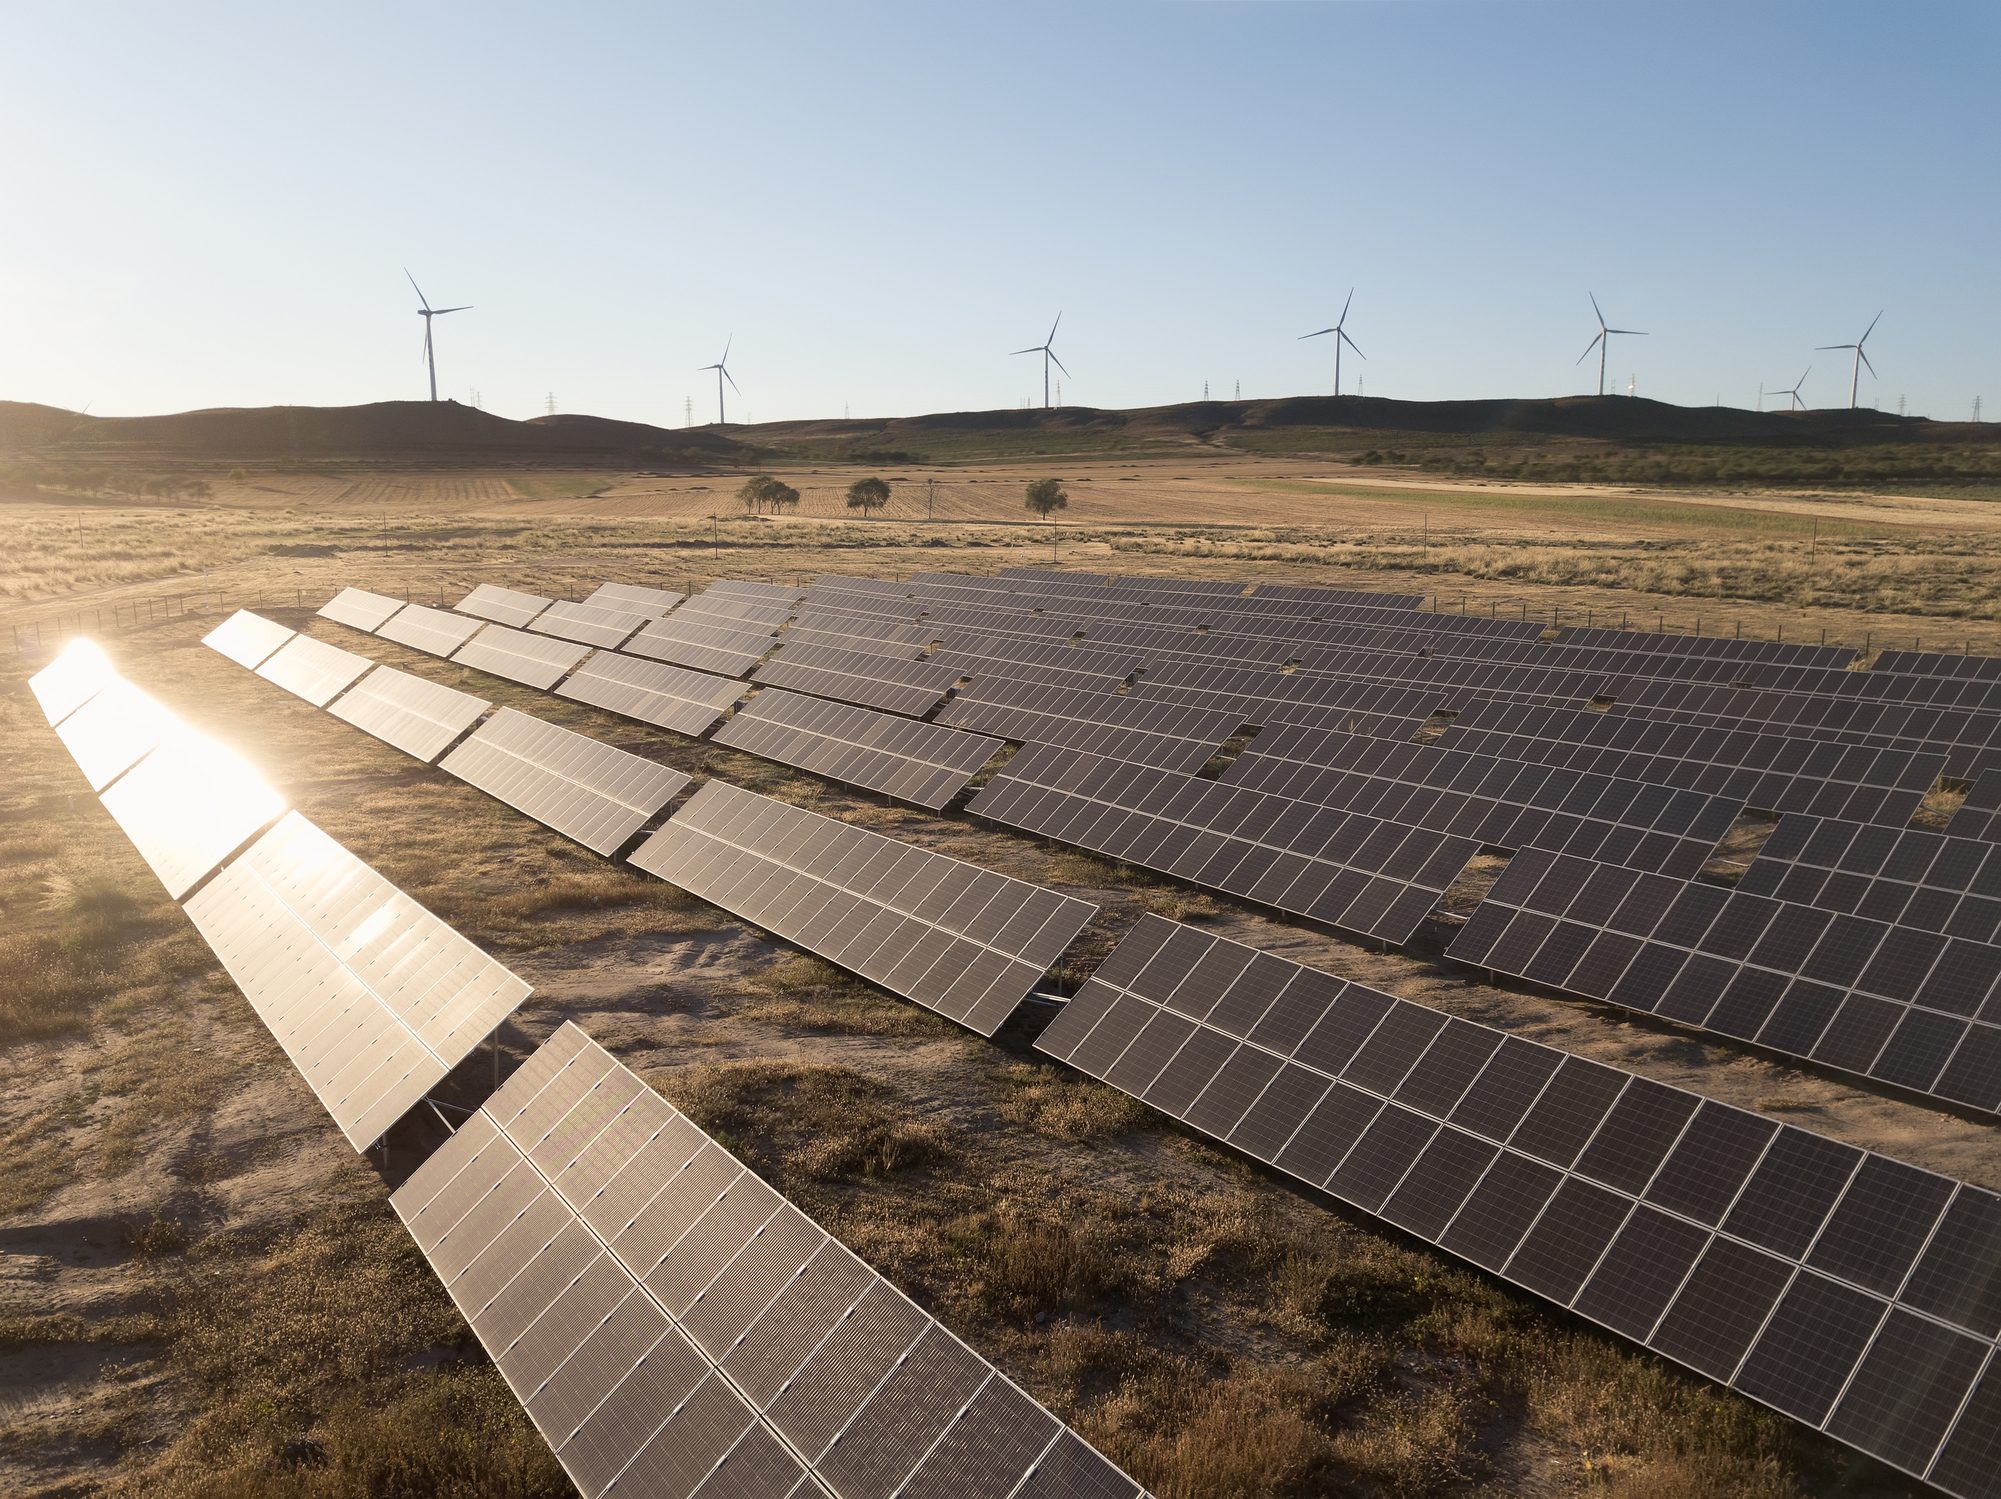 Carbon markets could help drive investment for renewable energy projects, such as solar power plants. (Getty Images)